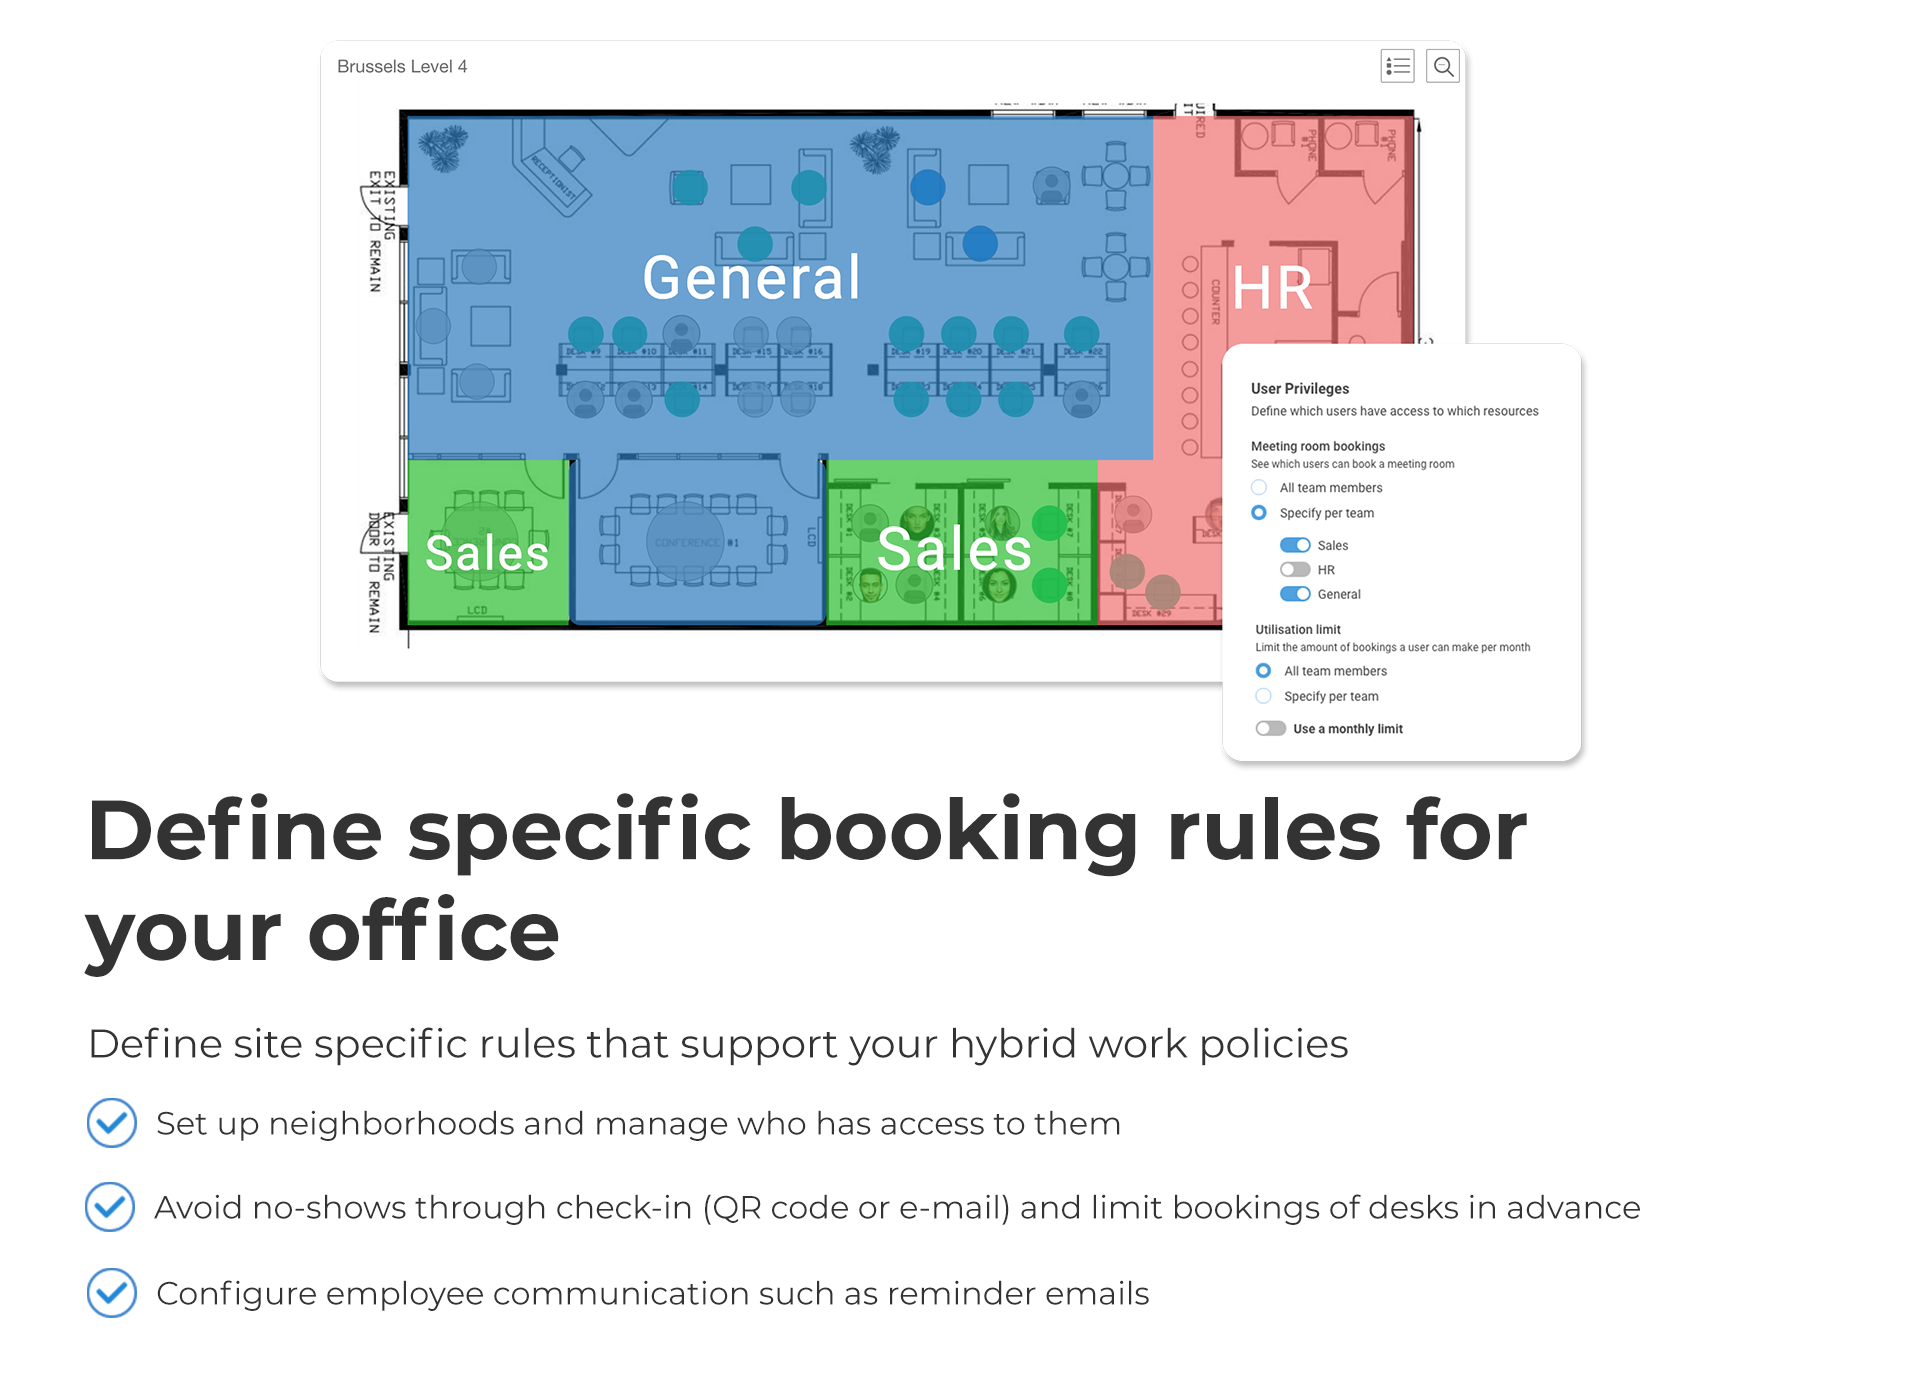 Tribeloo Software - Define specific booking rules